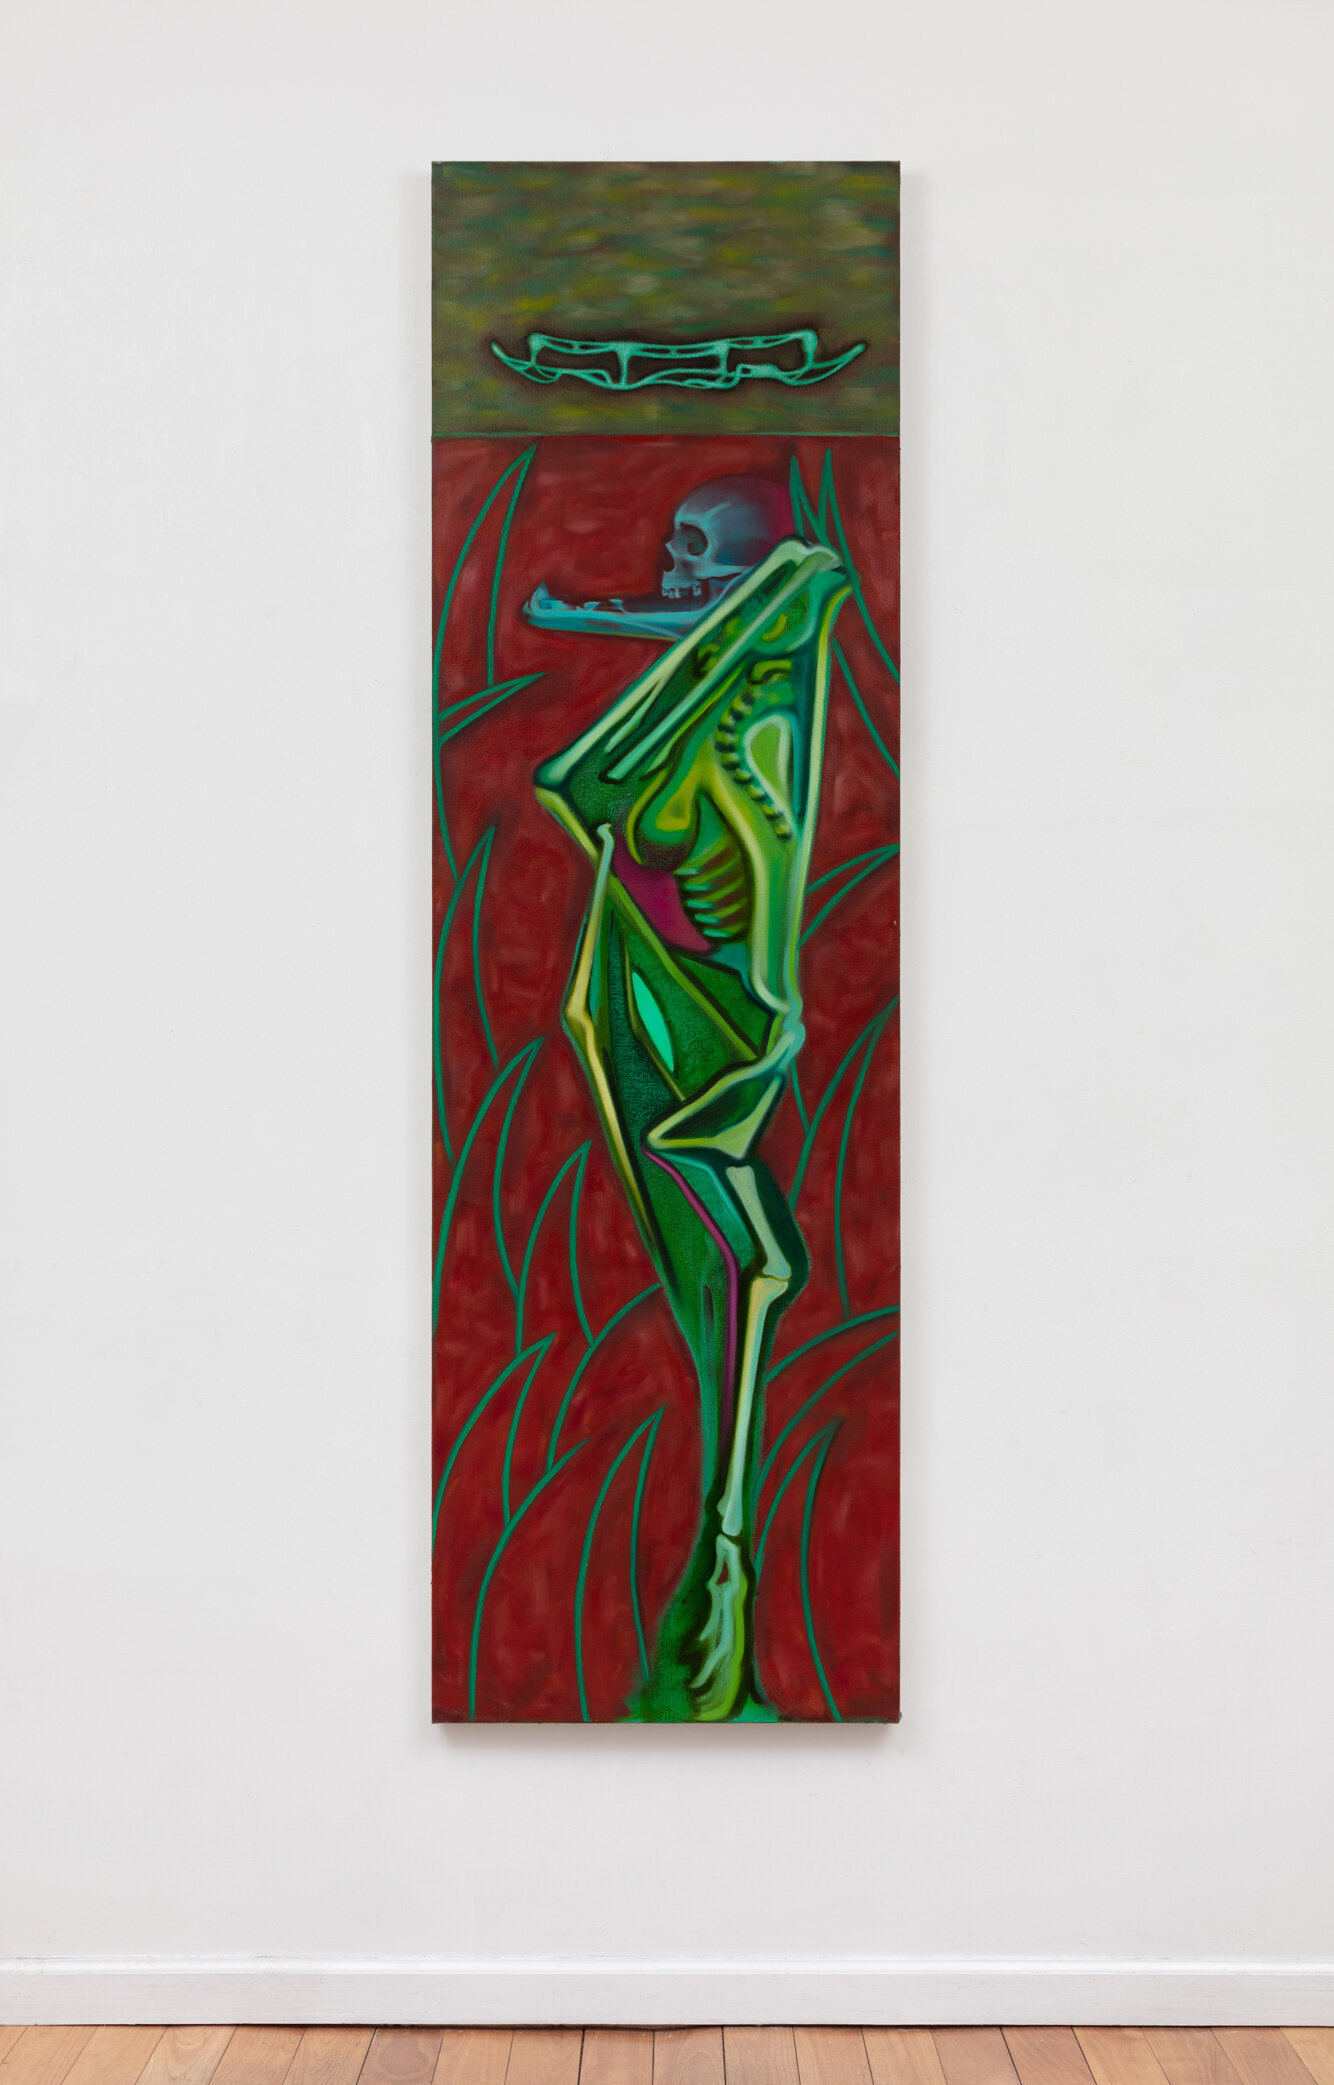   Green Bat,  2020-21. Oil on canvas. 80 x 24 inches. 